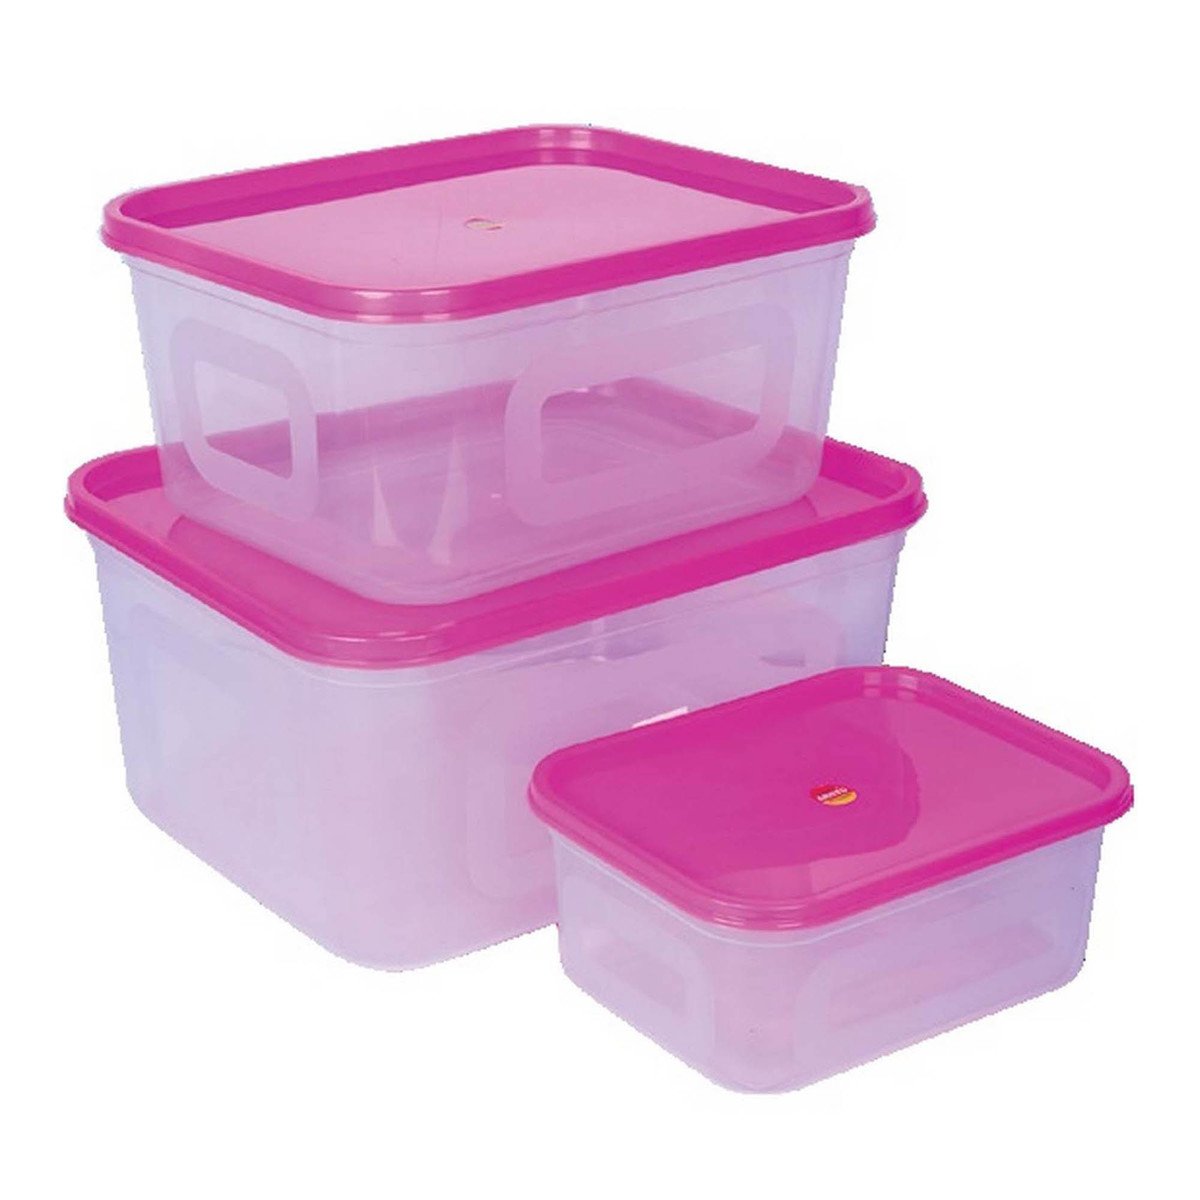 Aristo Food Container Set 3pcs Assorted Color